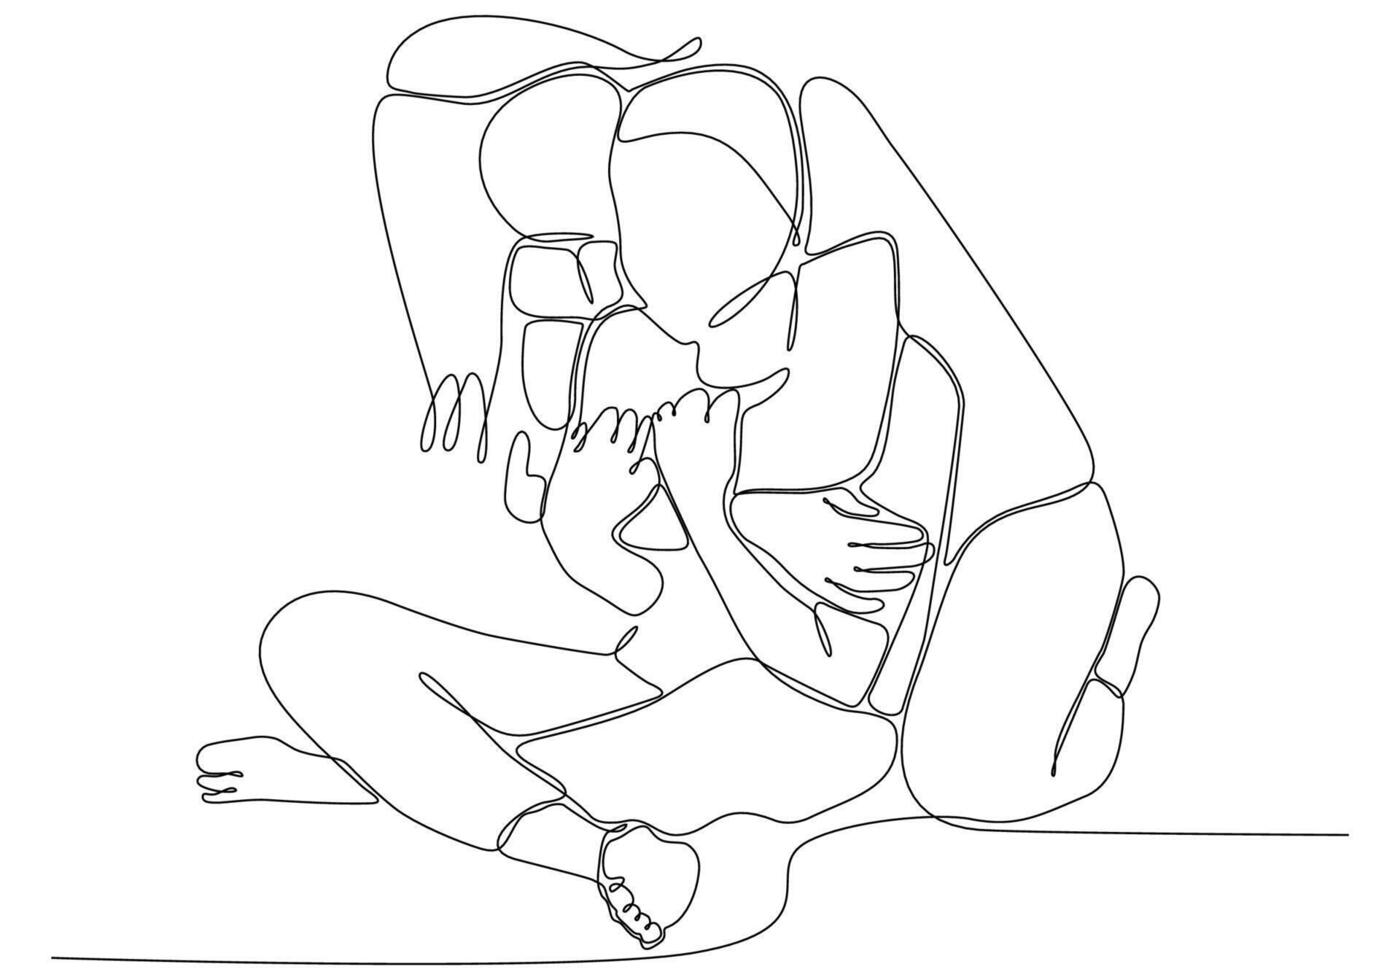 Continuous line drawing of cheerful women embracing each other. Two women hugging each other vector